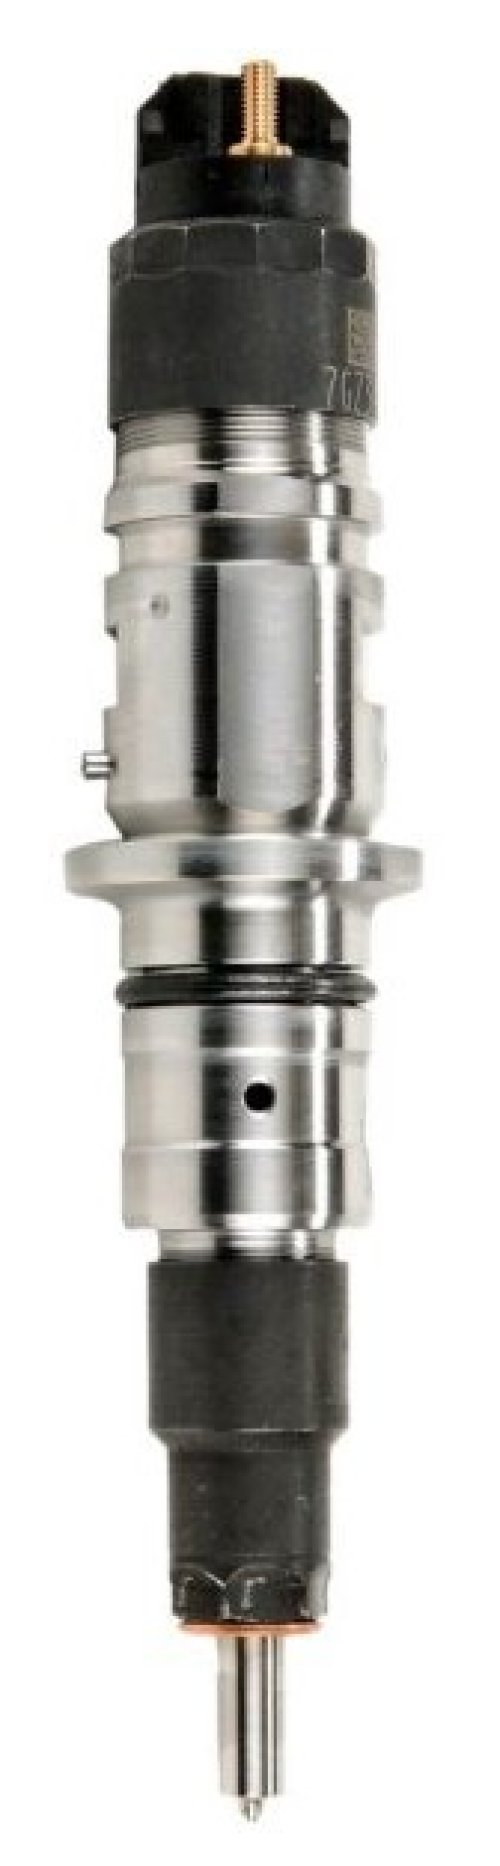 CUMMINS ENGINE CO. INJECTOR FOR BOSCH HPCR FUEL SYSTEM AUTO 6.7L